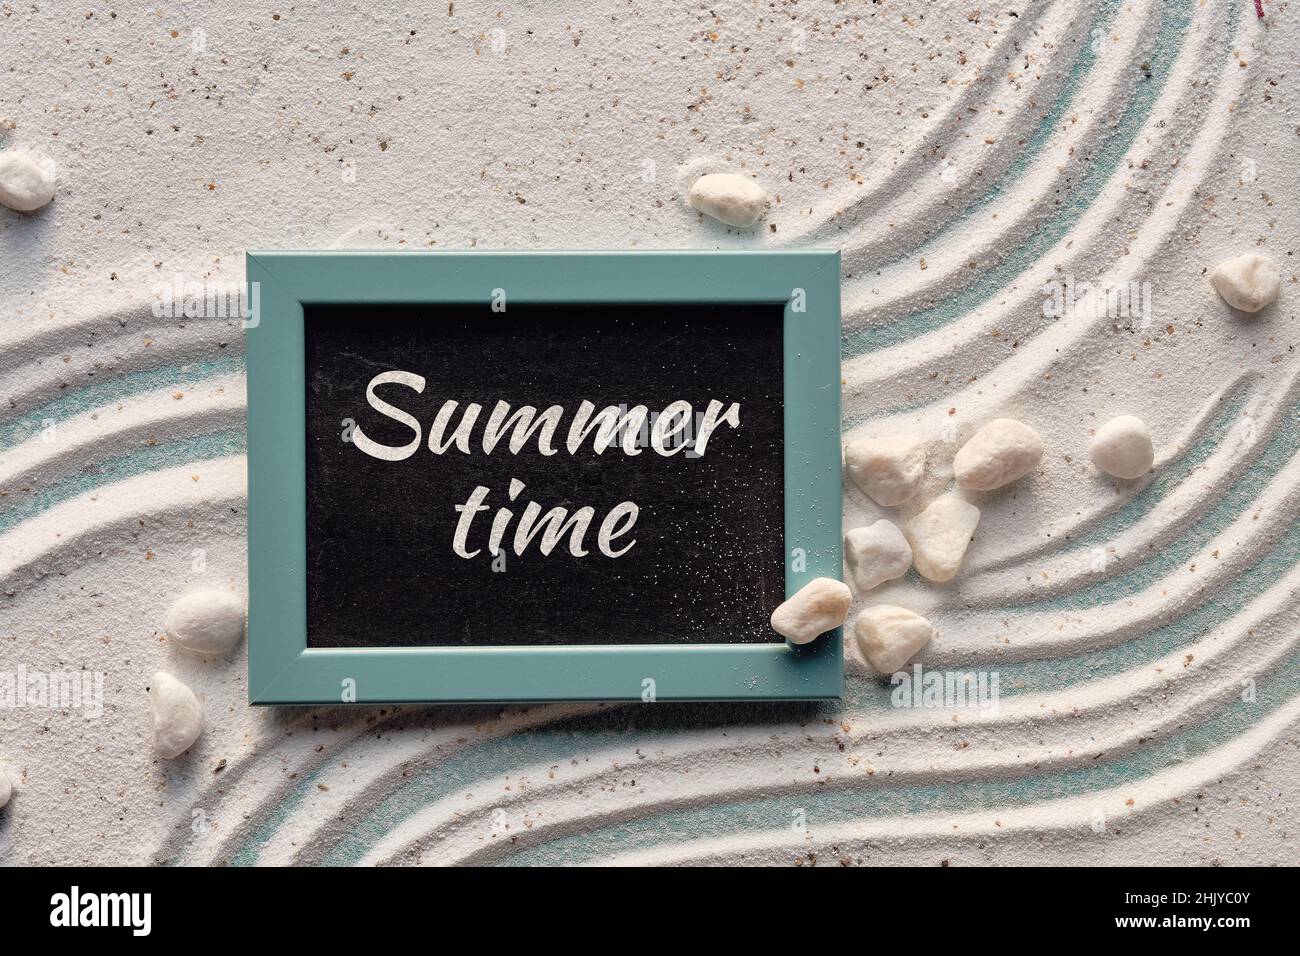 Summer time text on blackboard in mint green frame. Background with white sand with shells, starfish, Stock Photo